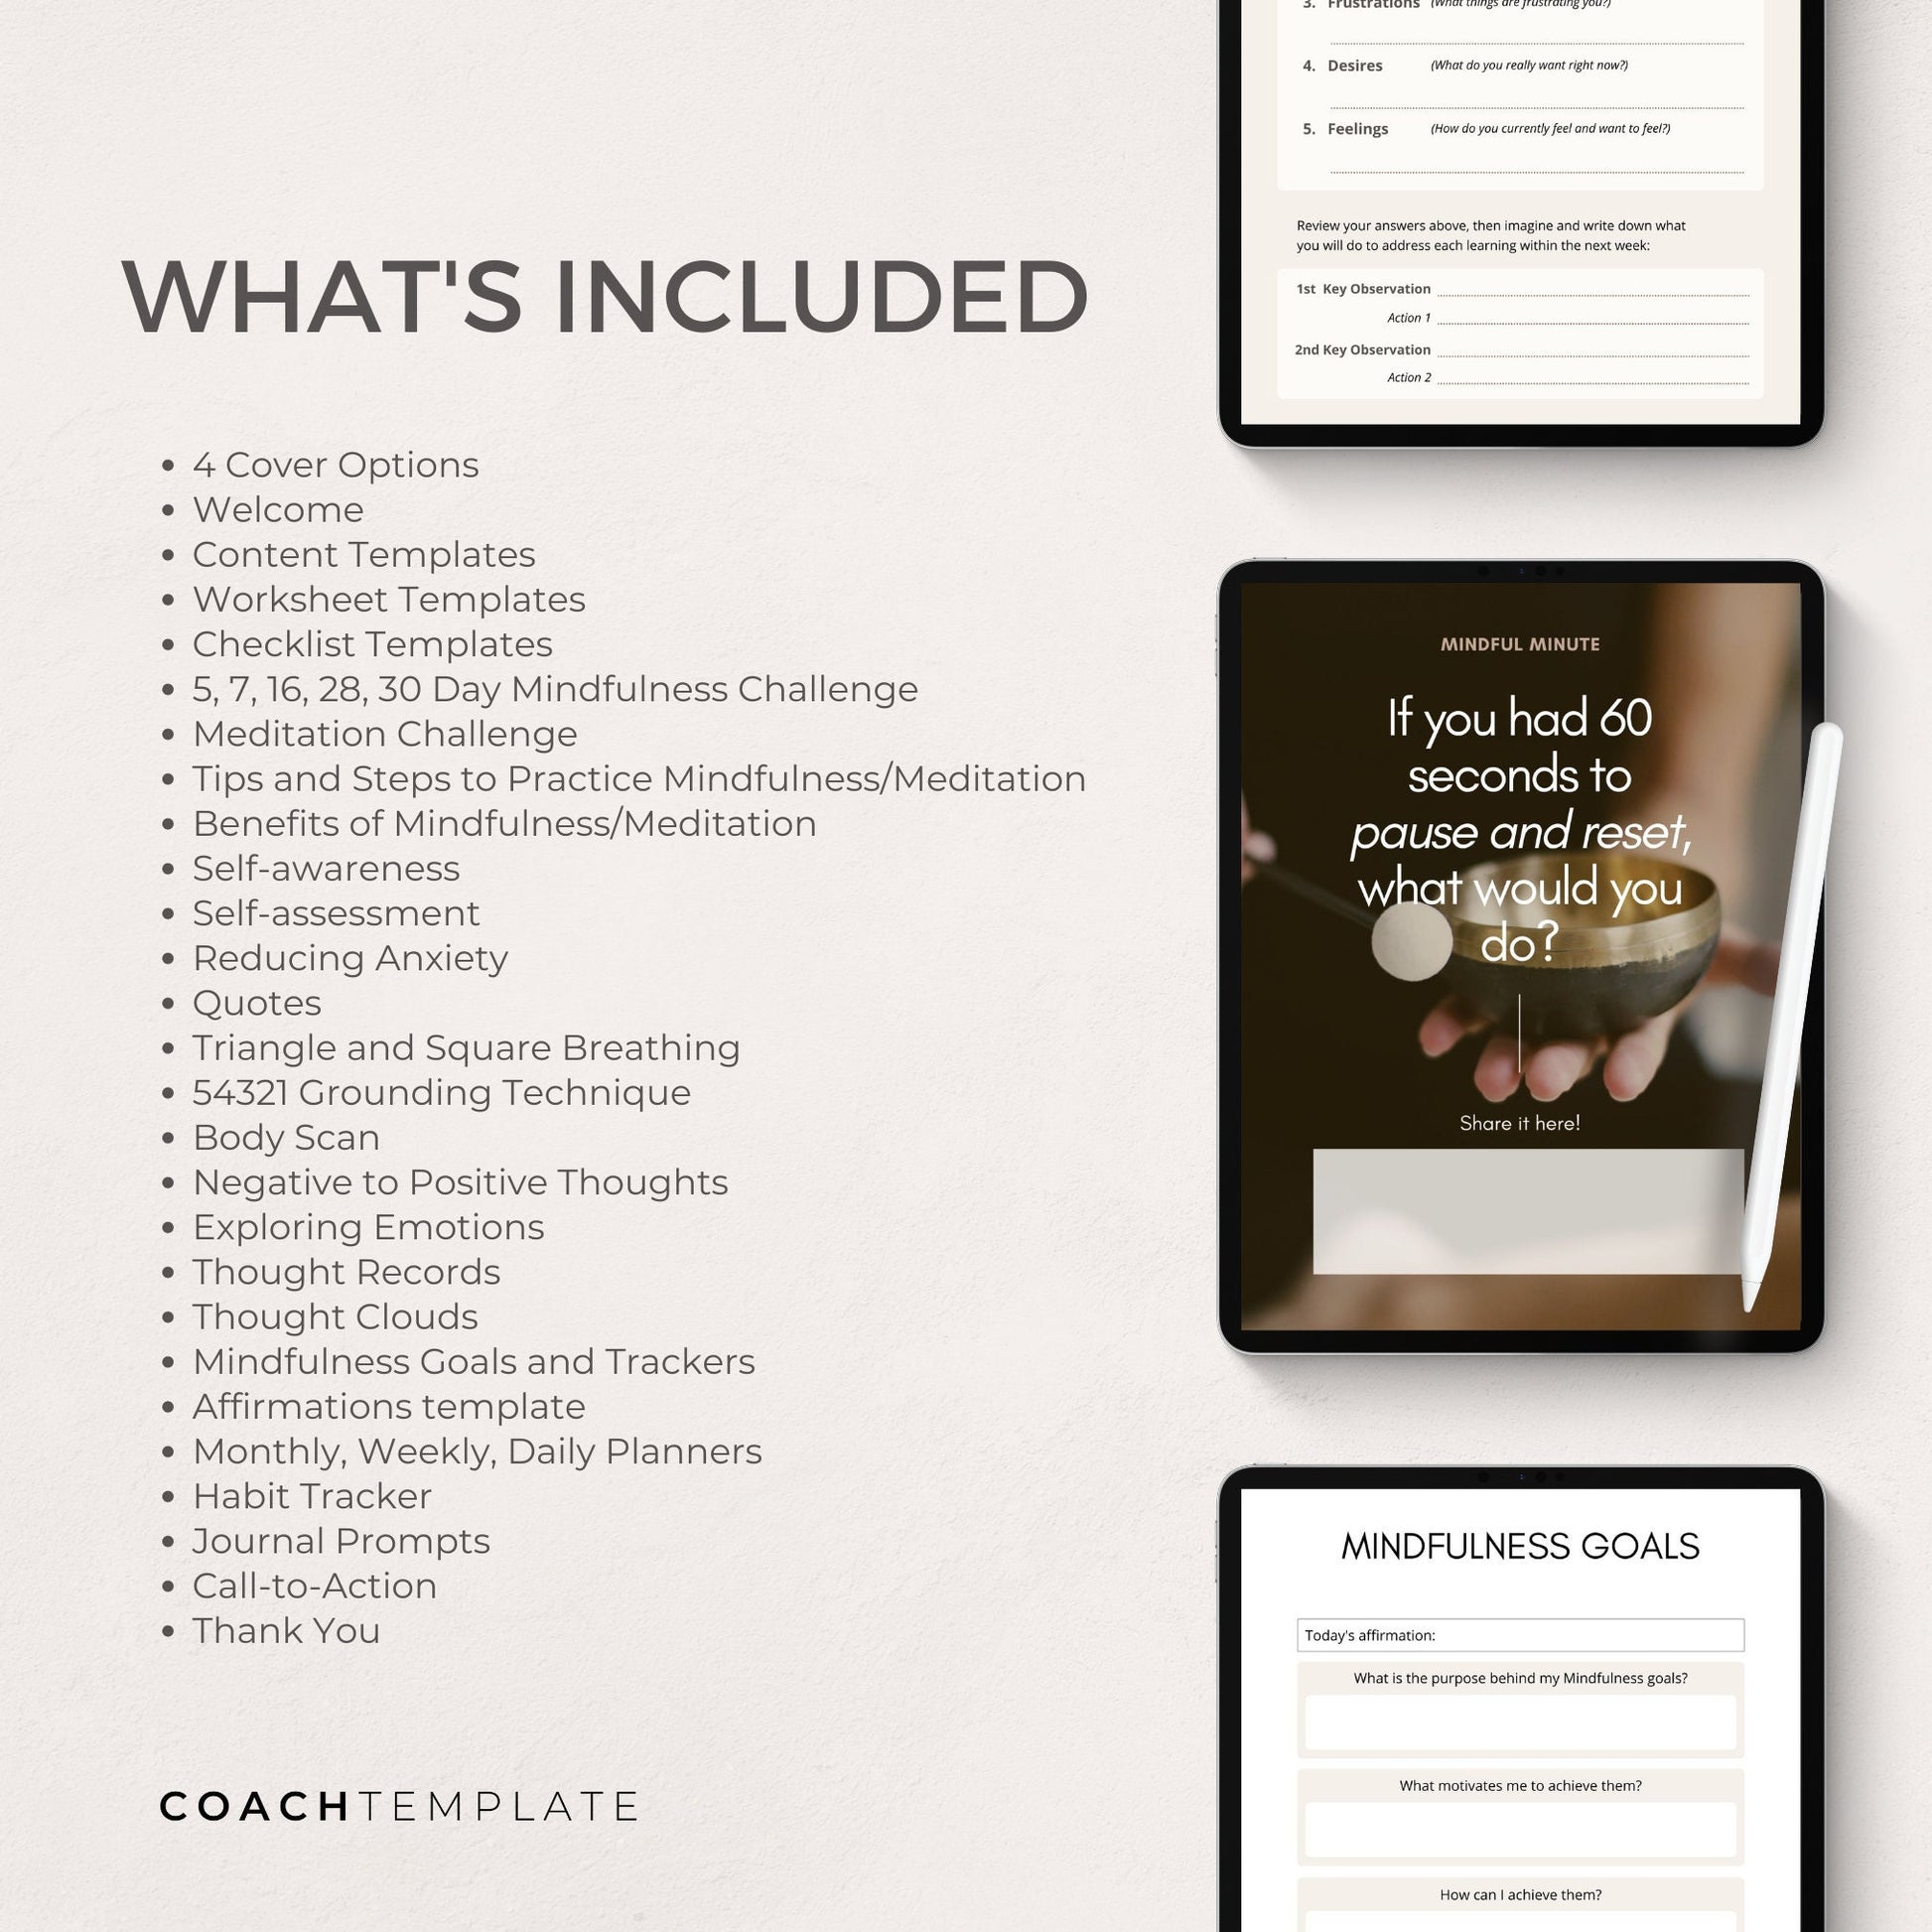 Editable Mindfulness Challenge Planner Journal Canva Template | Commercial Use Workbook Lead Magnet Coach Spiritual business content creator

Mindfulness Challenge Planner Journal Workbook Canva Template - CoachTemplate.com CT042